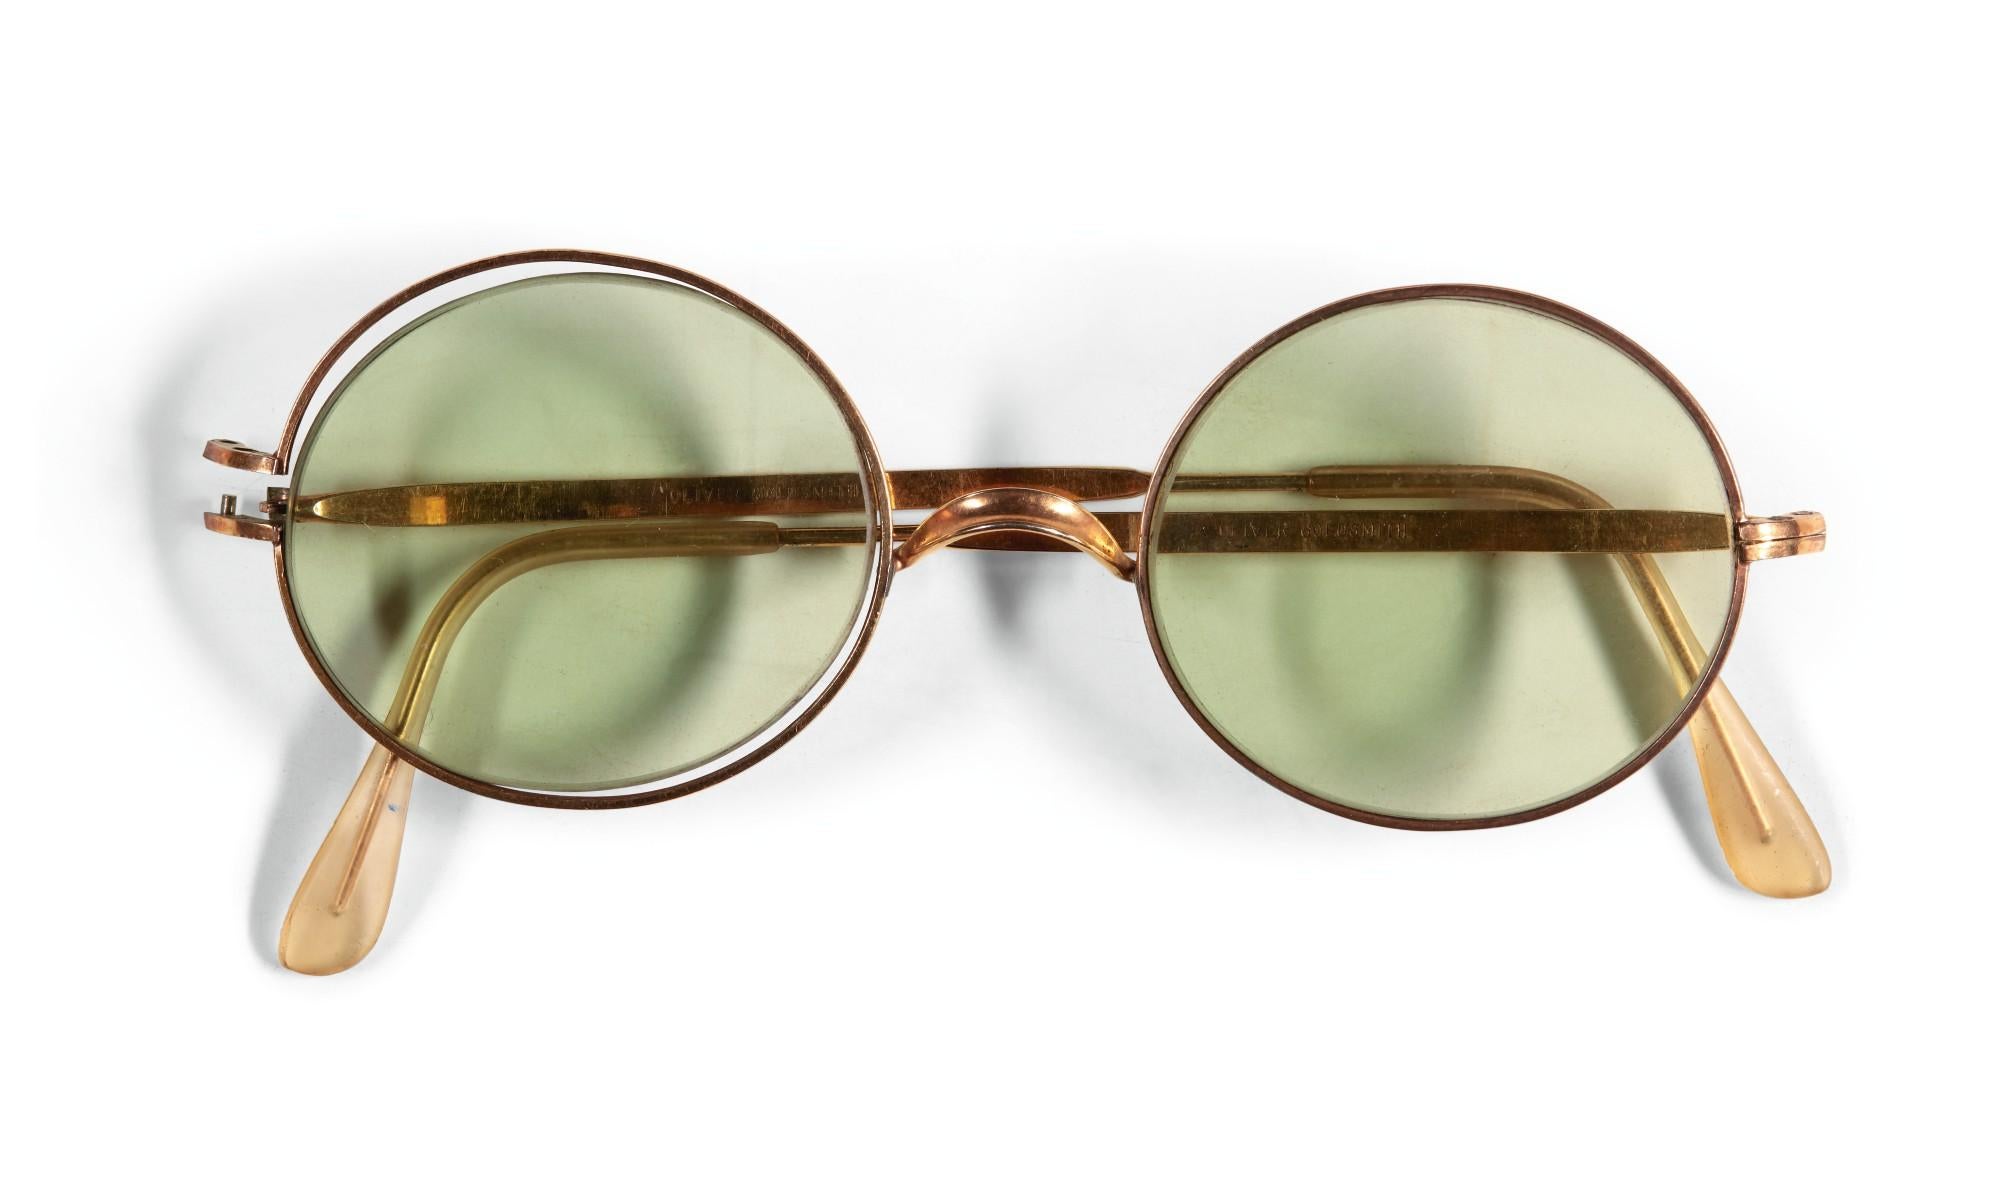 John Lennon's sunglasses sold at auction for £137,500 (Sotheby's)